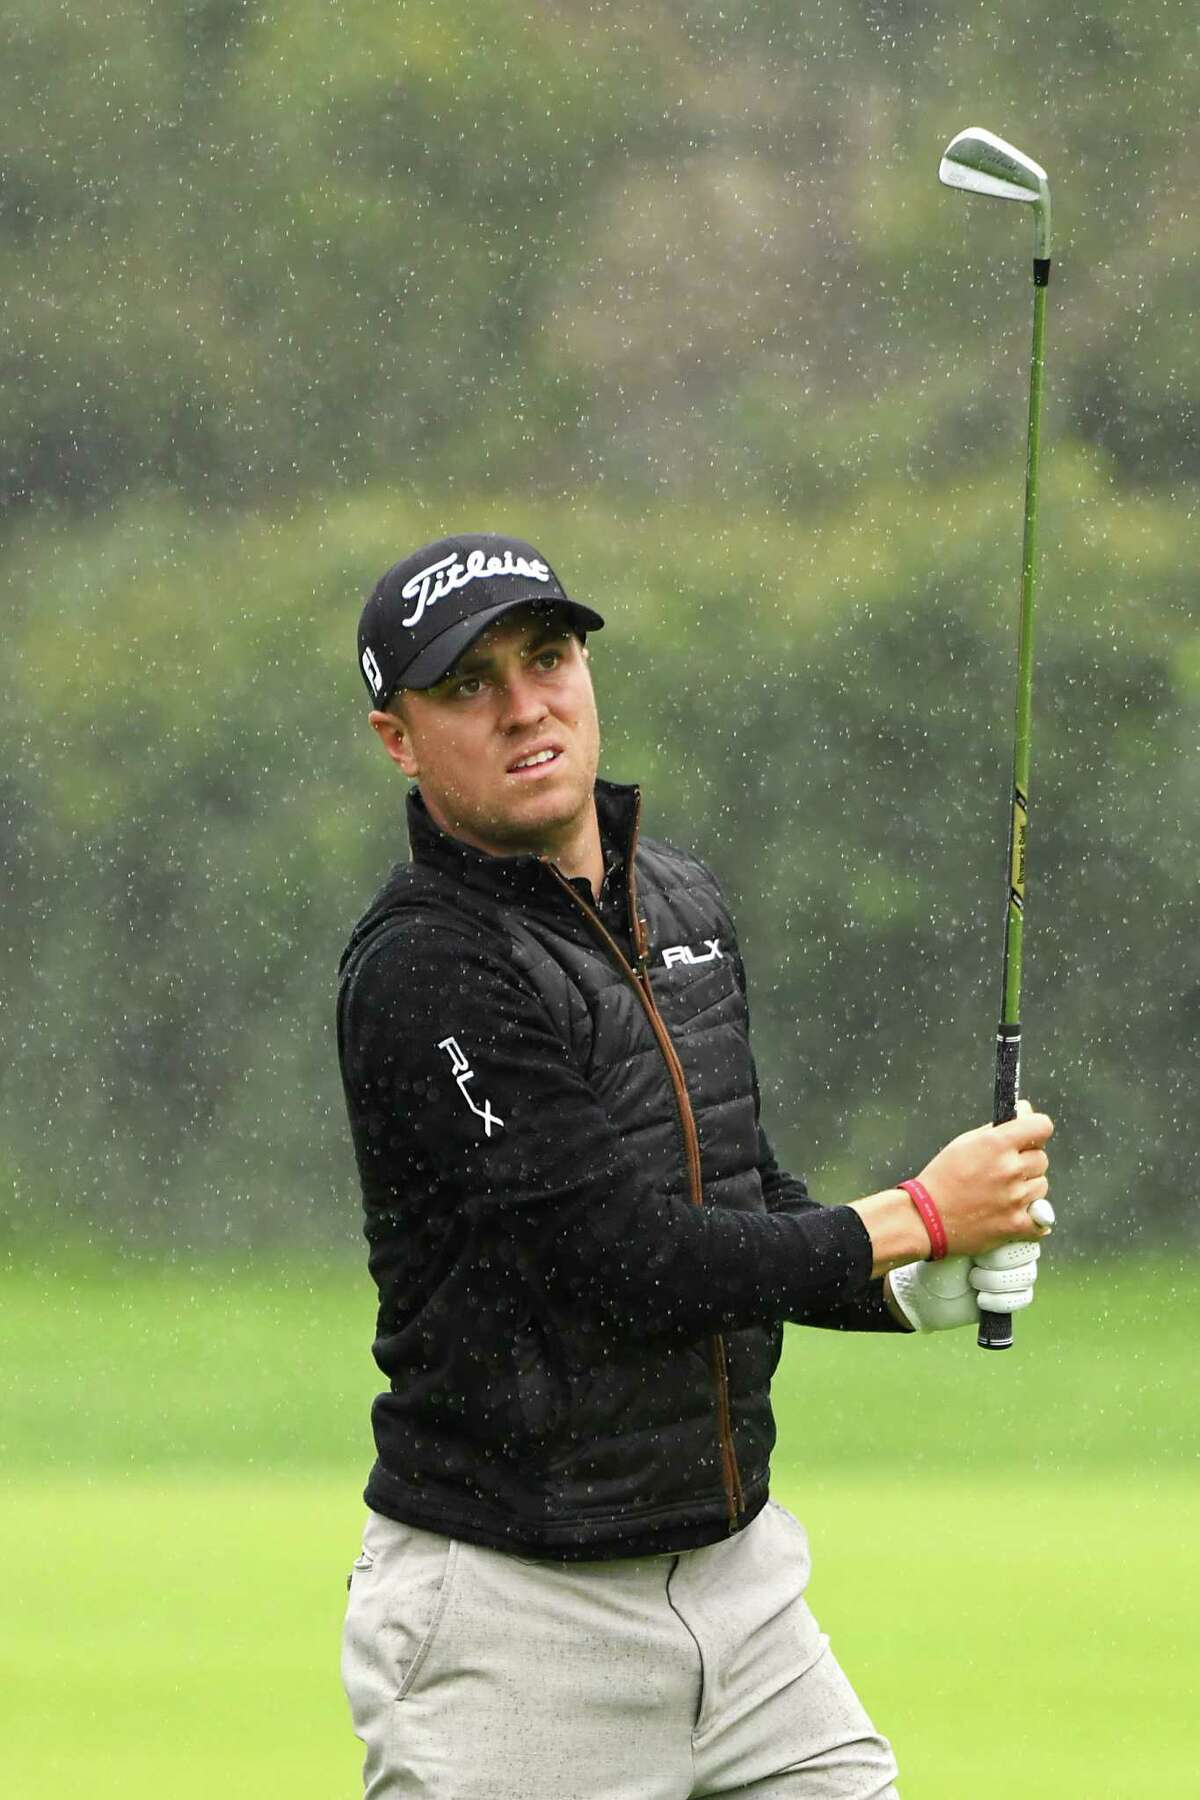 PACIFIC PALISADES, CALIFORNIA - FEBRUARY 15: Justin Thomas hits a second shot on the 12th hole during the second round of the Genesis Open at Riviera Country Club on February 15, 2019 in Pacific Palisades, California. (Photo by Harry How/Getty Images)